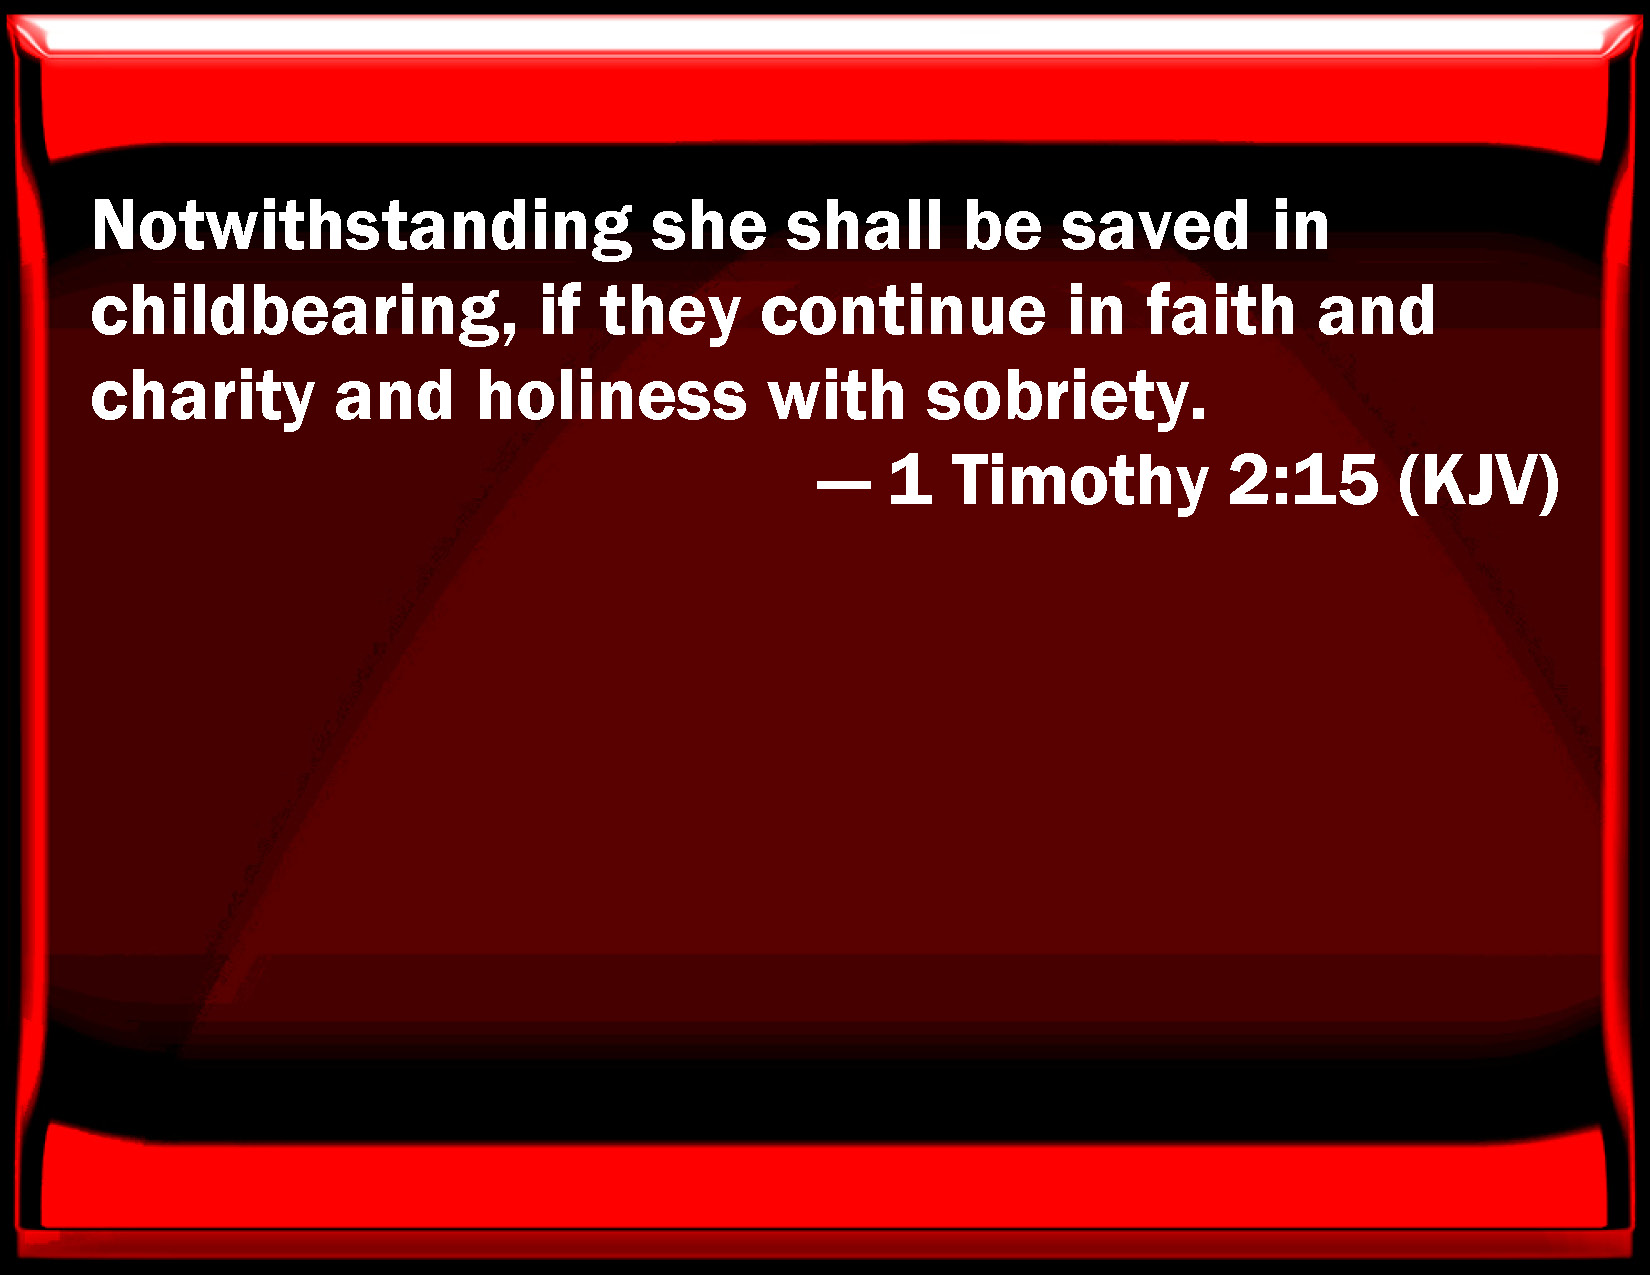 1 Timothy 215 Notwithstanding she shall be saved in